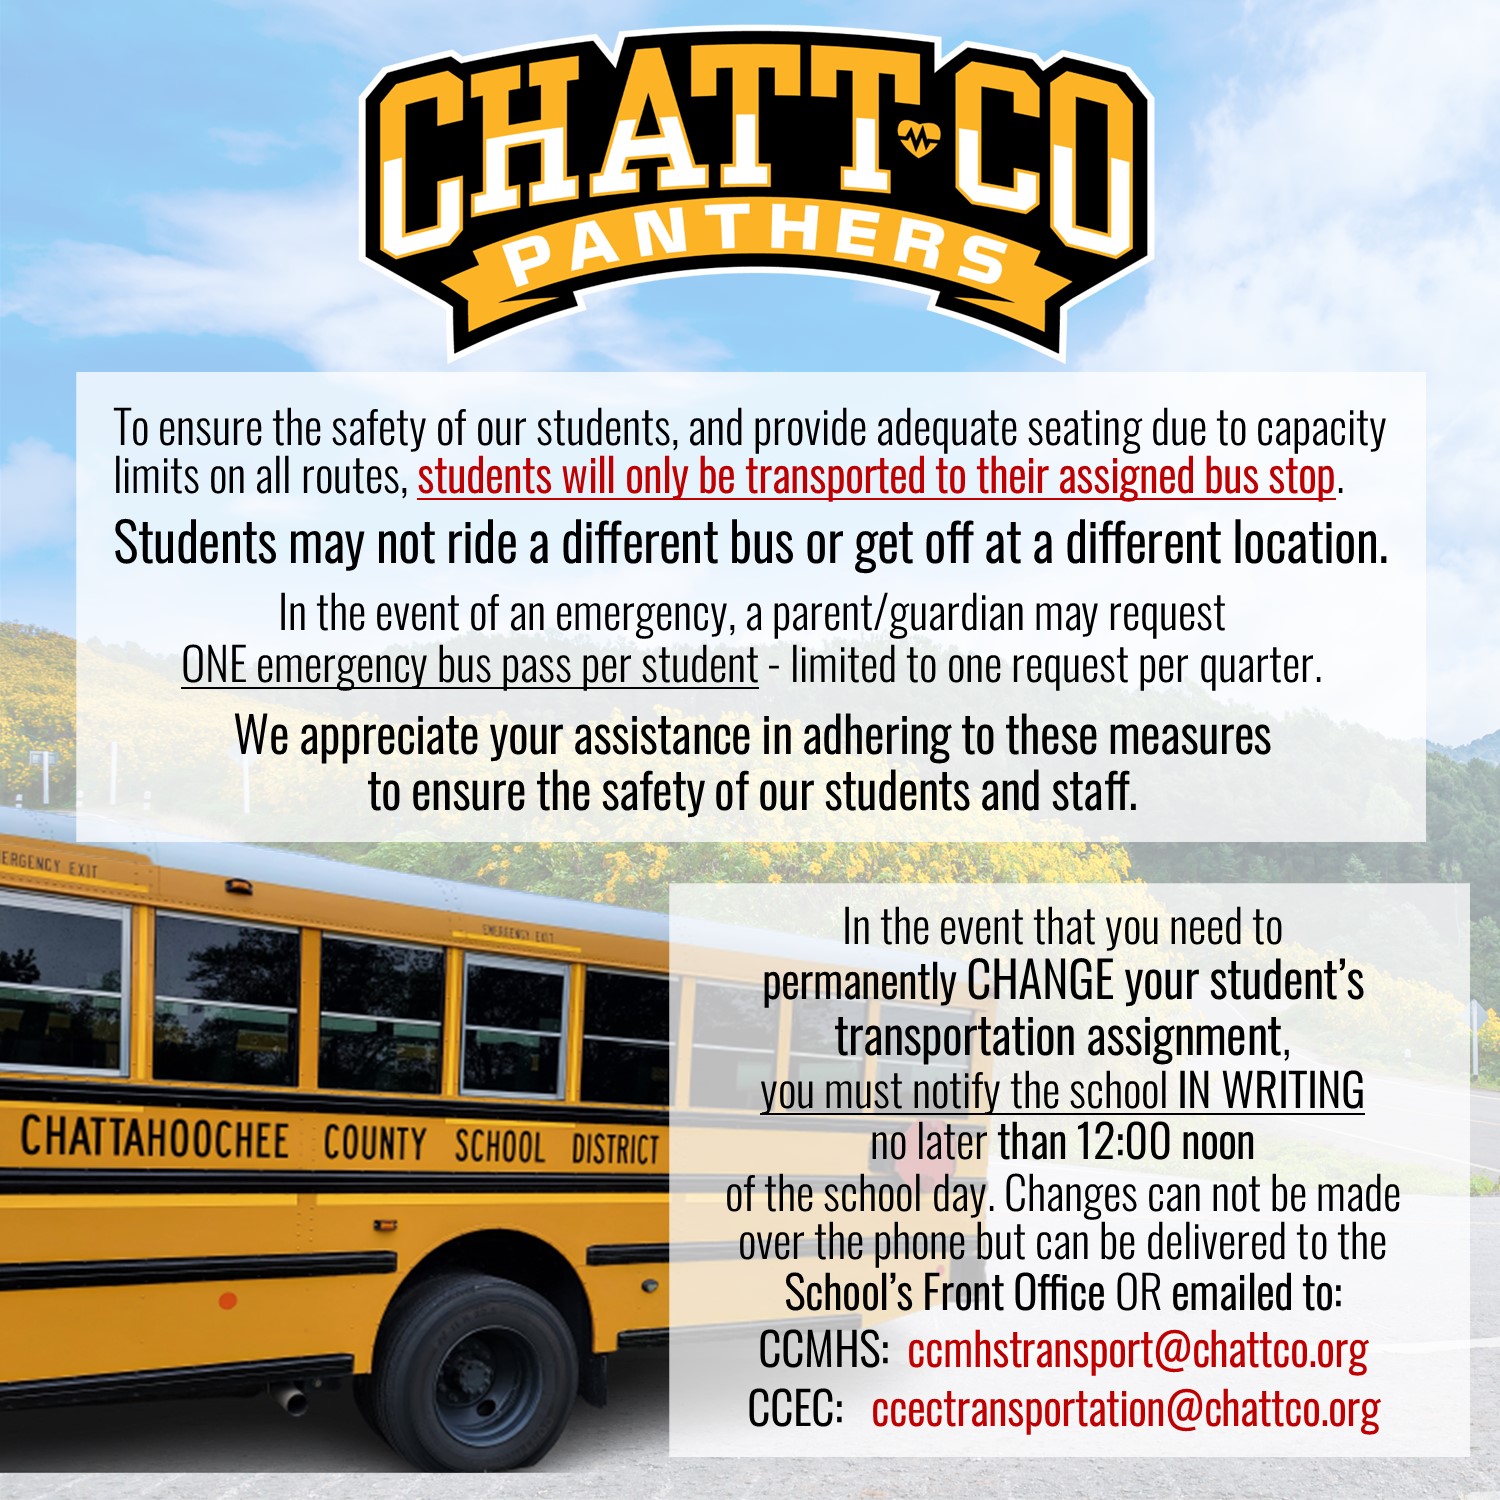 To ensure the safety of our students, and provide adequate seating due to capacity limits on all routes, students will only be transported to their assigned bus stop.  Students may not ride a different bus or get off at a different location. In the event of an emergency, a parent/guardian may request  ONE emergency bus pass per student - limited to one request per quarter. We appreciate your assistance in adhering to these measures  to ensure the safety of our students and staff.  In the event that you need to permanently CHANGE your student’s transportation assignment, you must notify the school IN WRITING no later than 12:00 noon of the school day. Changes can not be made over the phone but can be delivered to the School’s Front Office OR emailed to: CCMHS:  ccmhstransport@chattco.org CCEC:   ccectransportation@chattco.org